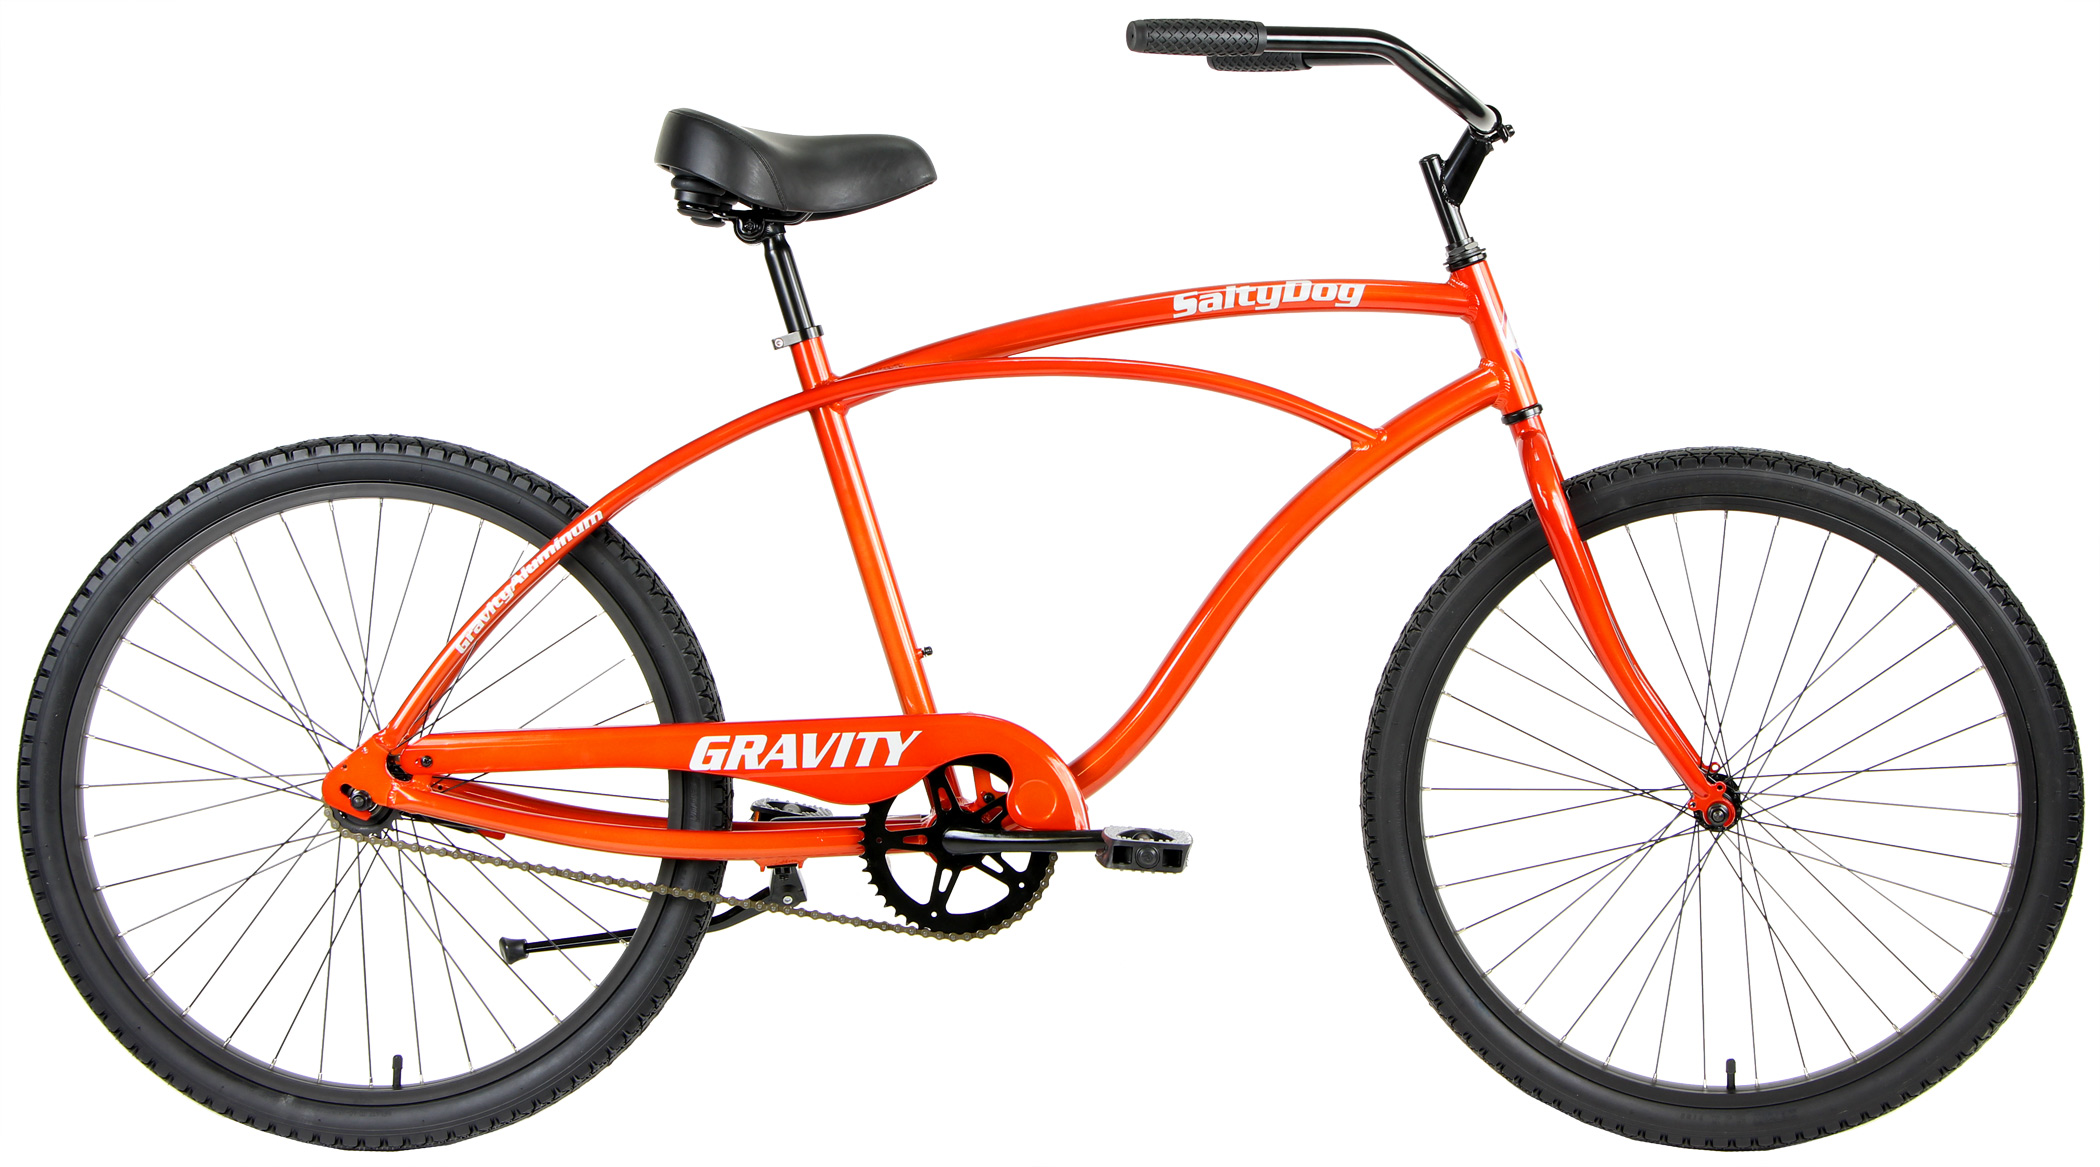 Save Up to 60% Off Mens and Aluminum Cruiser Bikes, Gravity Salty Dog Aluminum Cruiser Bicycles for Town, Neighborhood or Beach Riding Women's Cruisers come with Stylish and Cute Custom Color